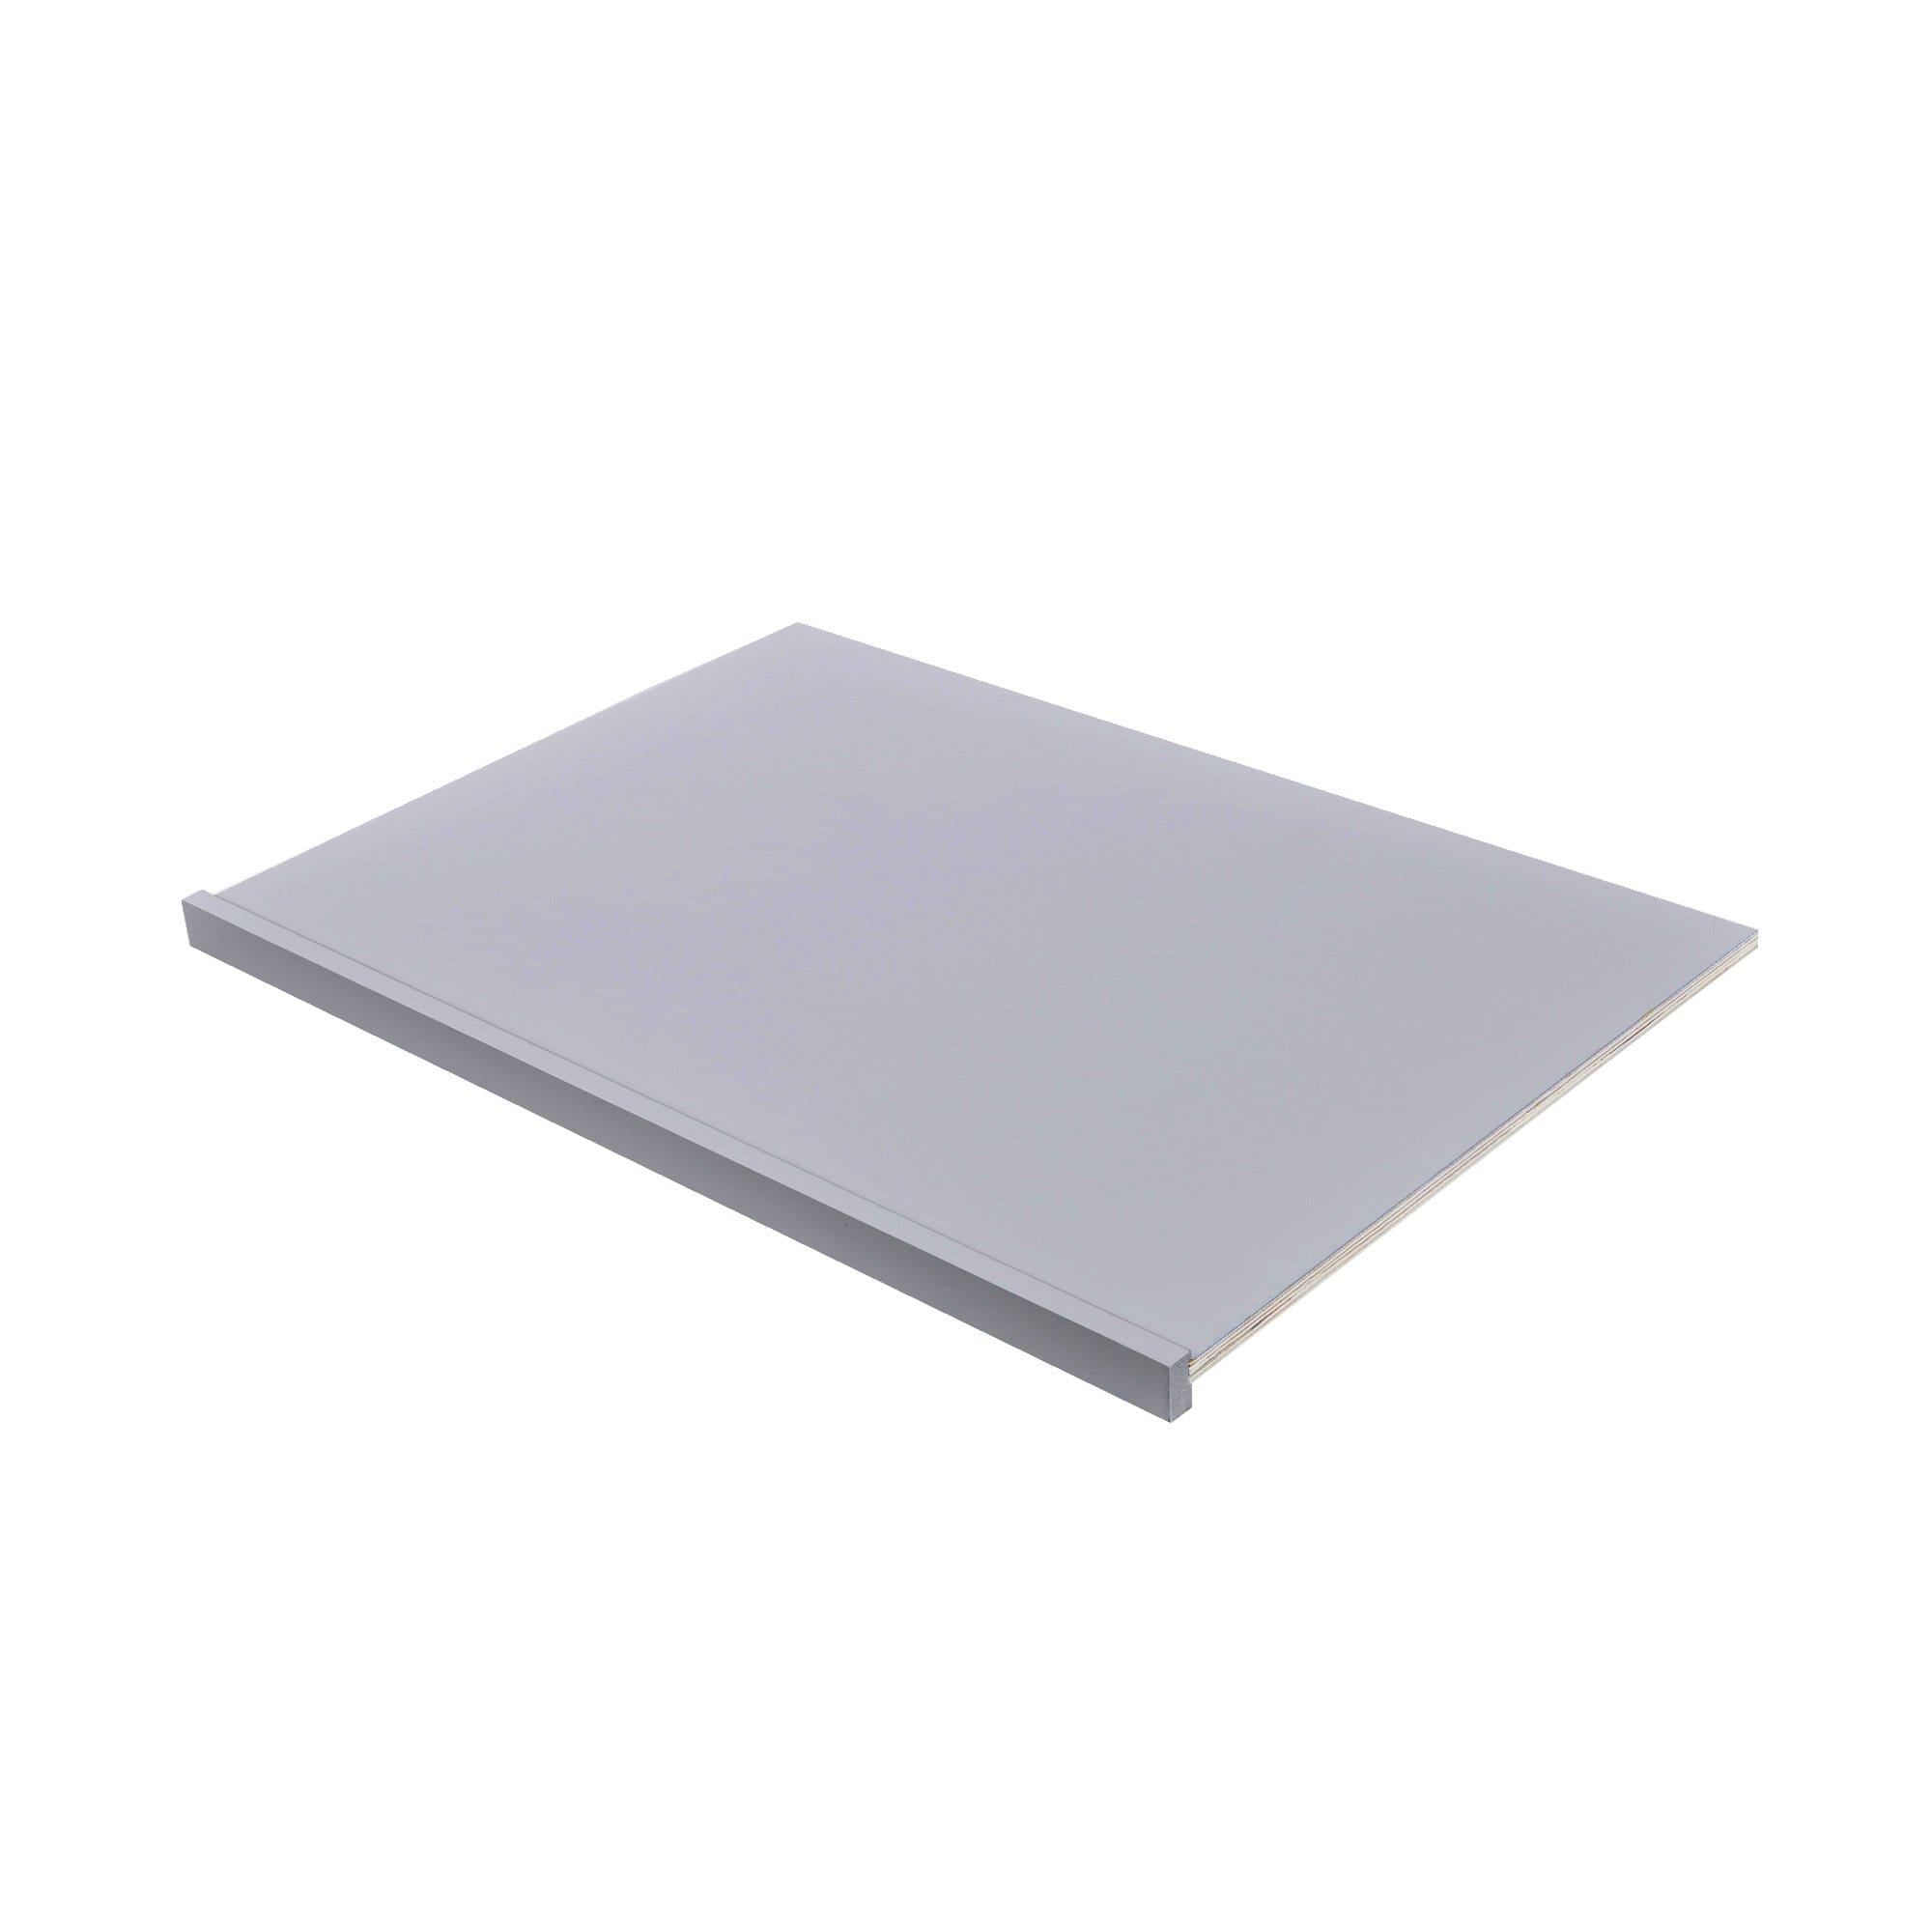 Accessories Dishwasher End Panel and Face frame Light Gray Inset Shaker D1DWPNL Inset Kitchen Cabinets